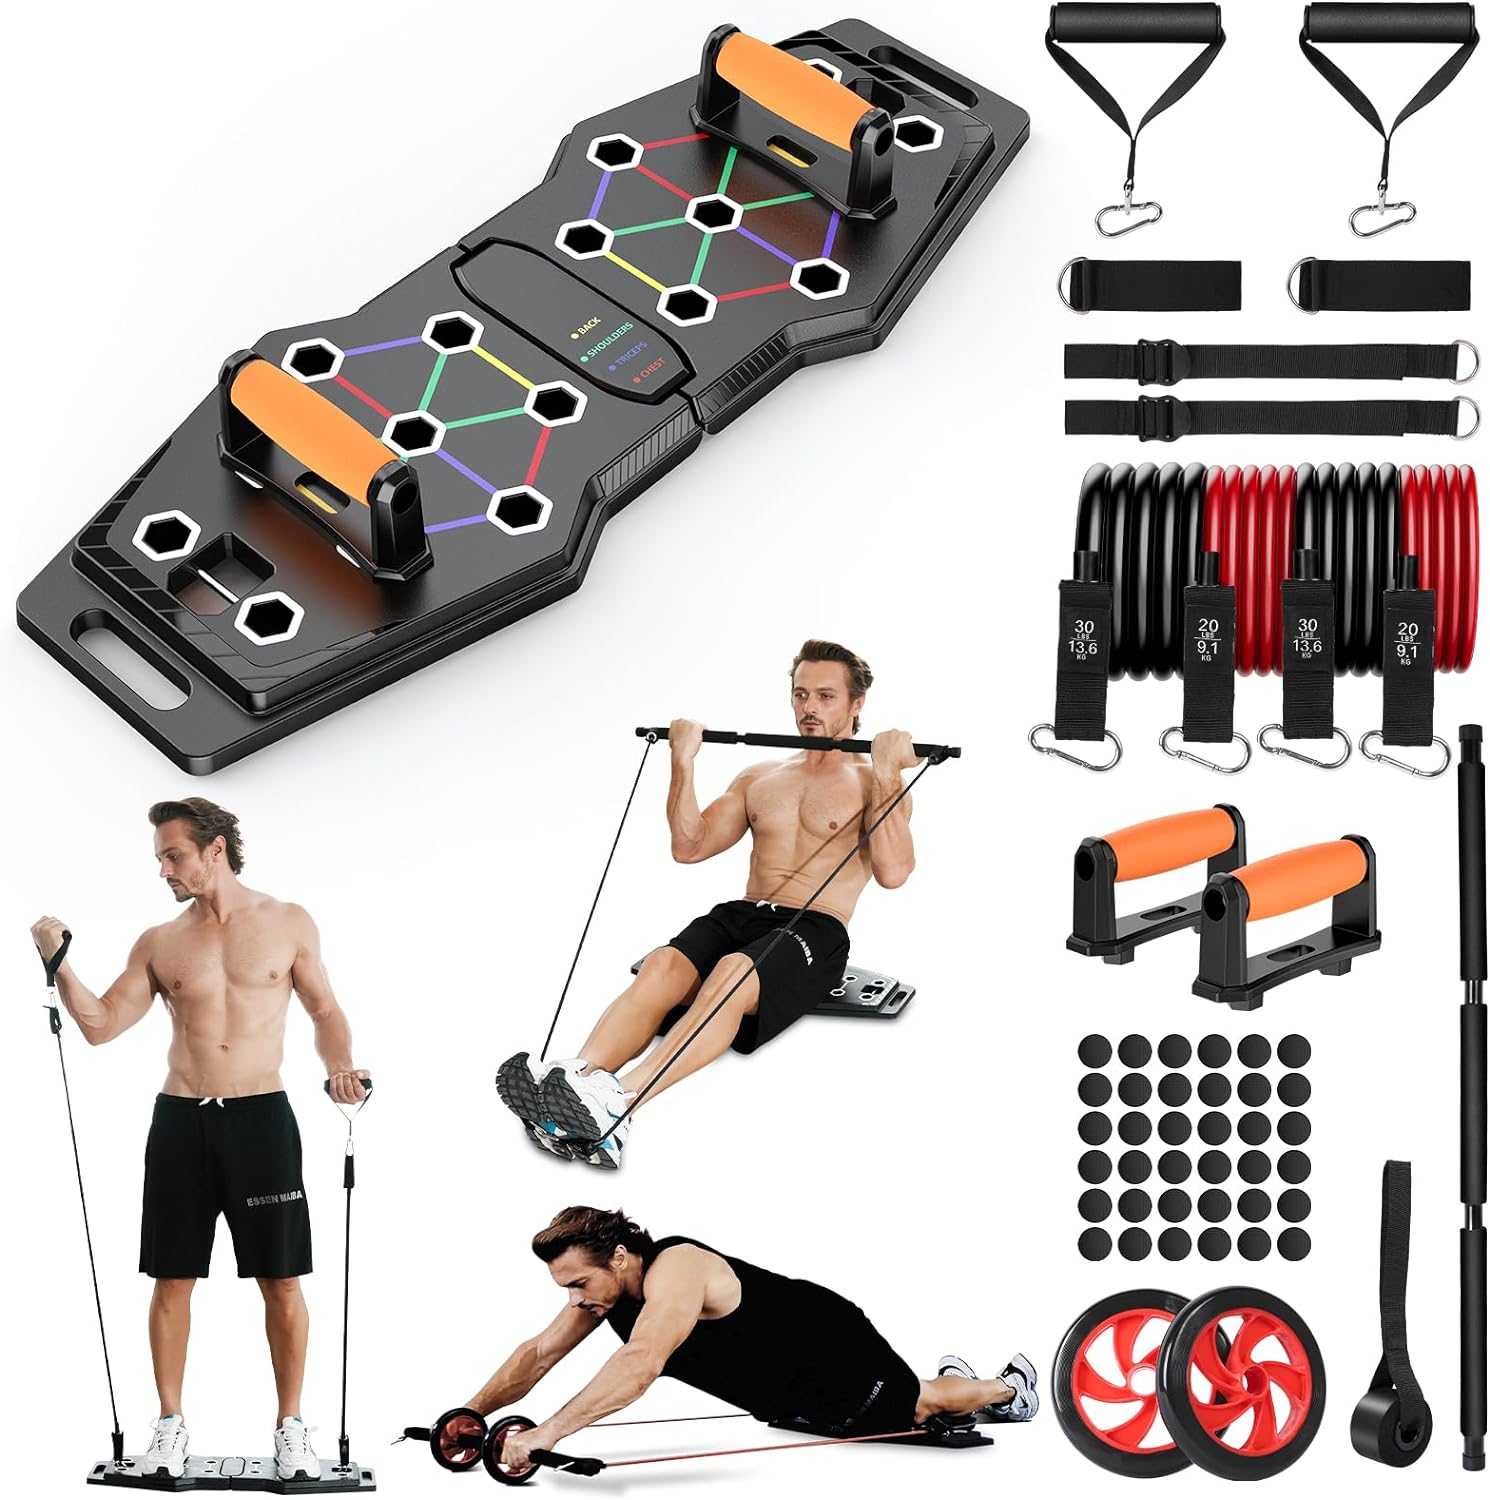 Foldable Push Up Board Review